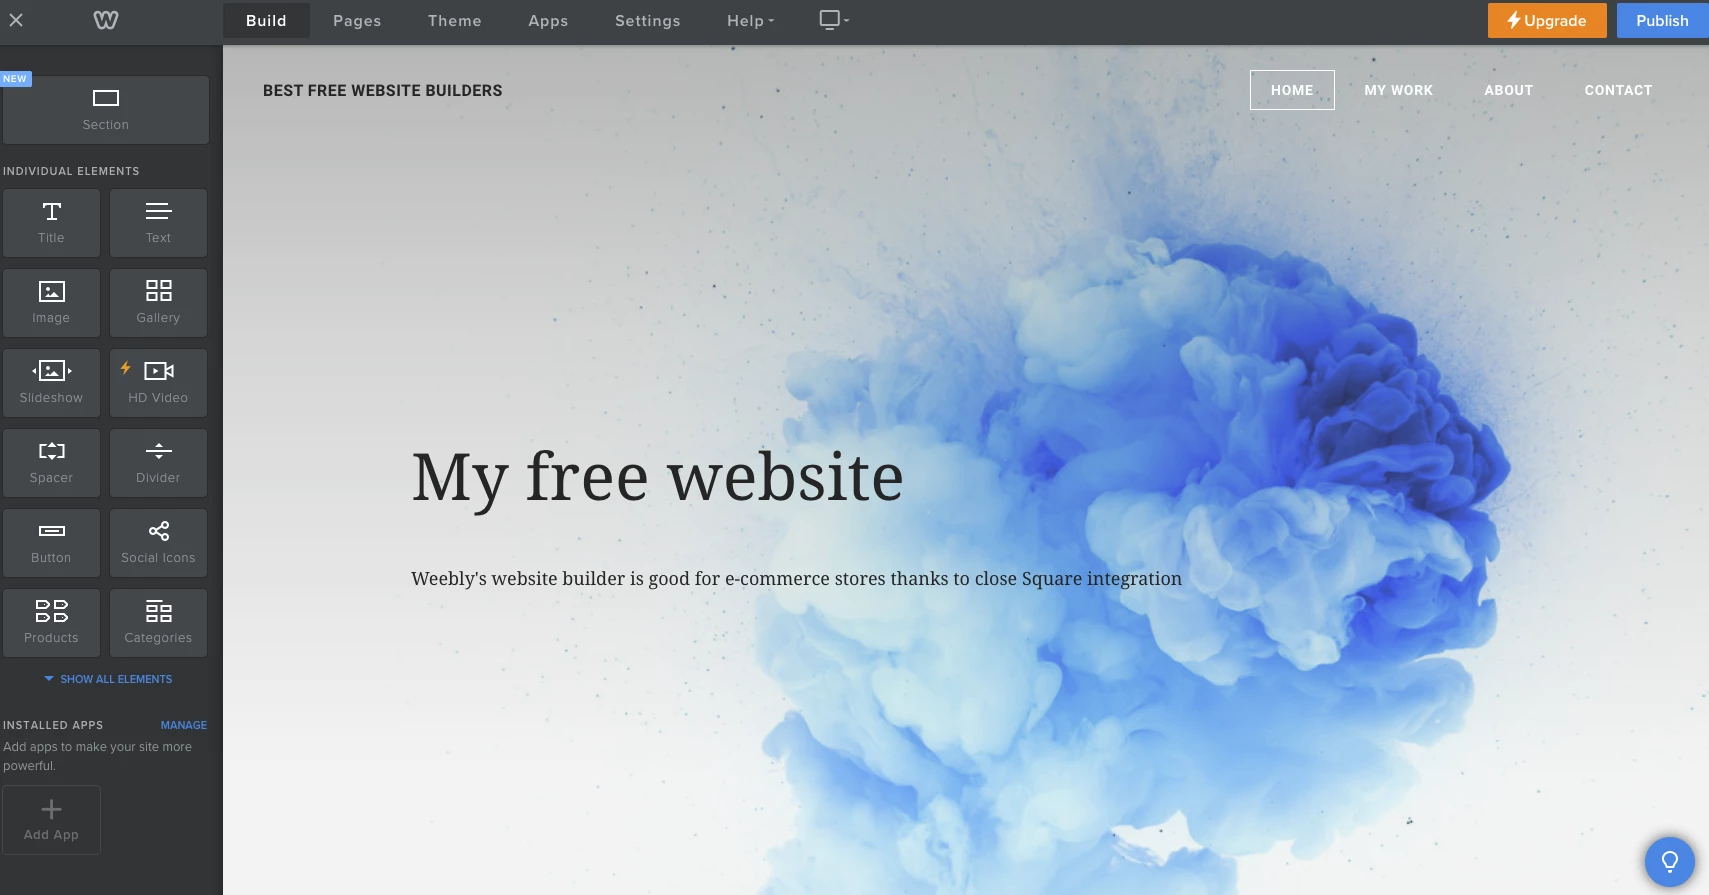 Website built with Weebly